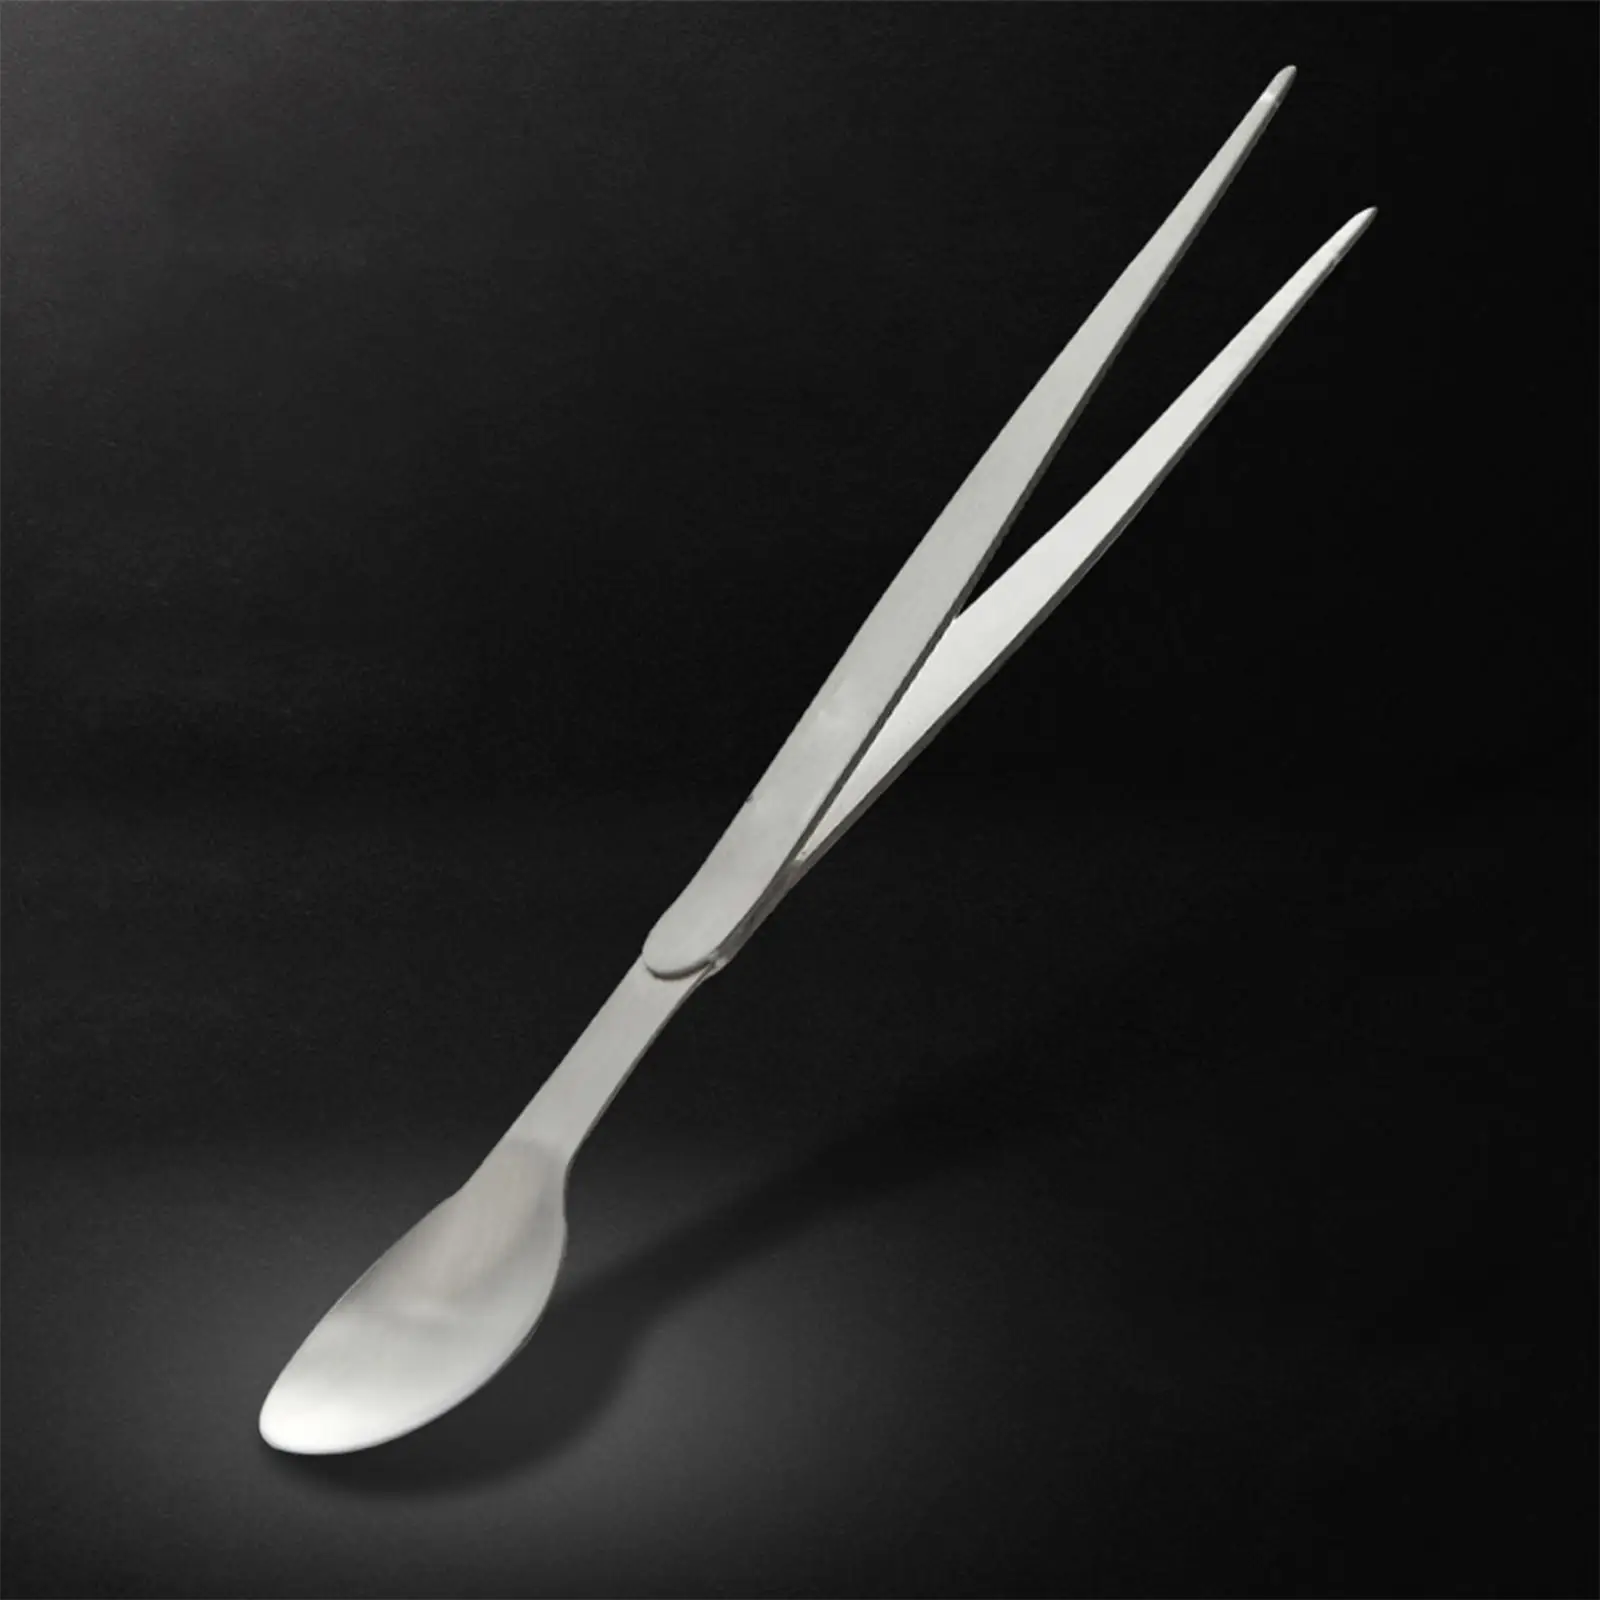 2 in 1 Tasting Spoon Dual Function 20.5cm for Tea Dinner Table Kitchen Accessories cake